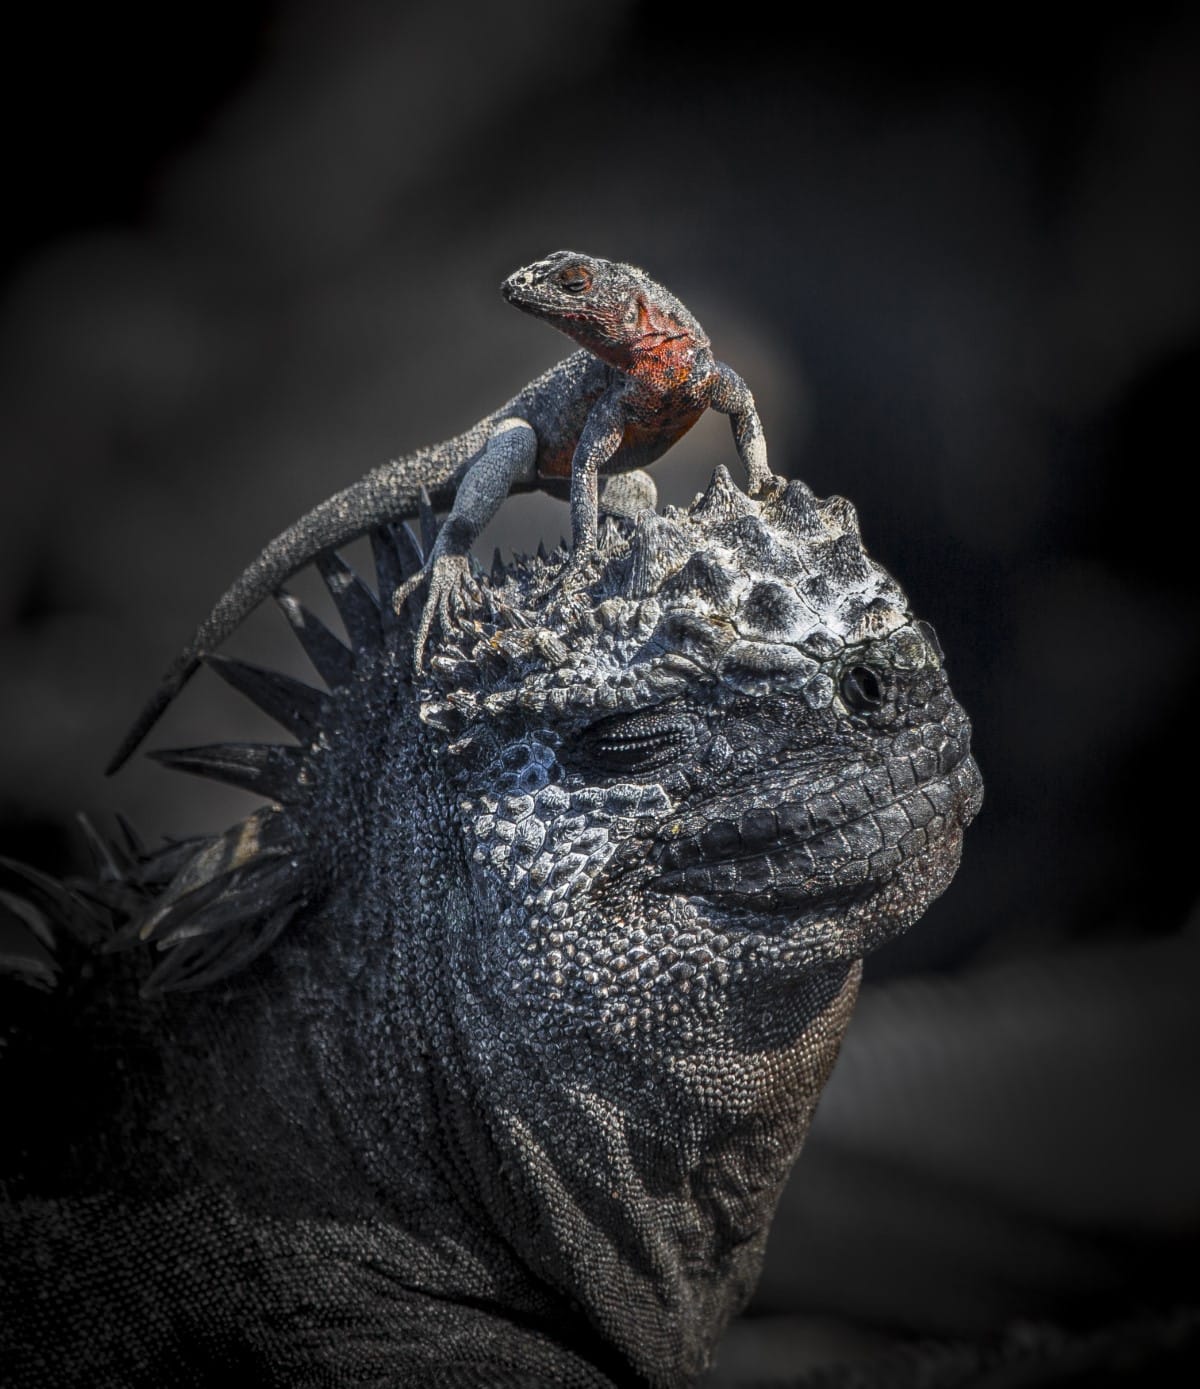 A lava lizard standing on a marine iguana in the Galapagos Islands